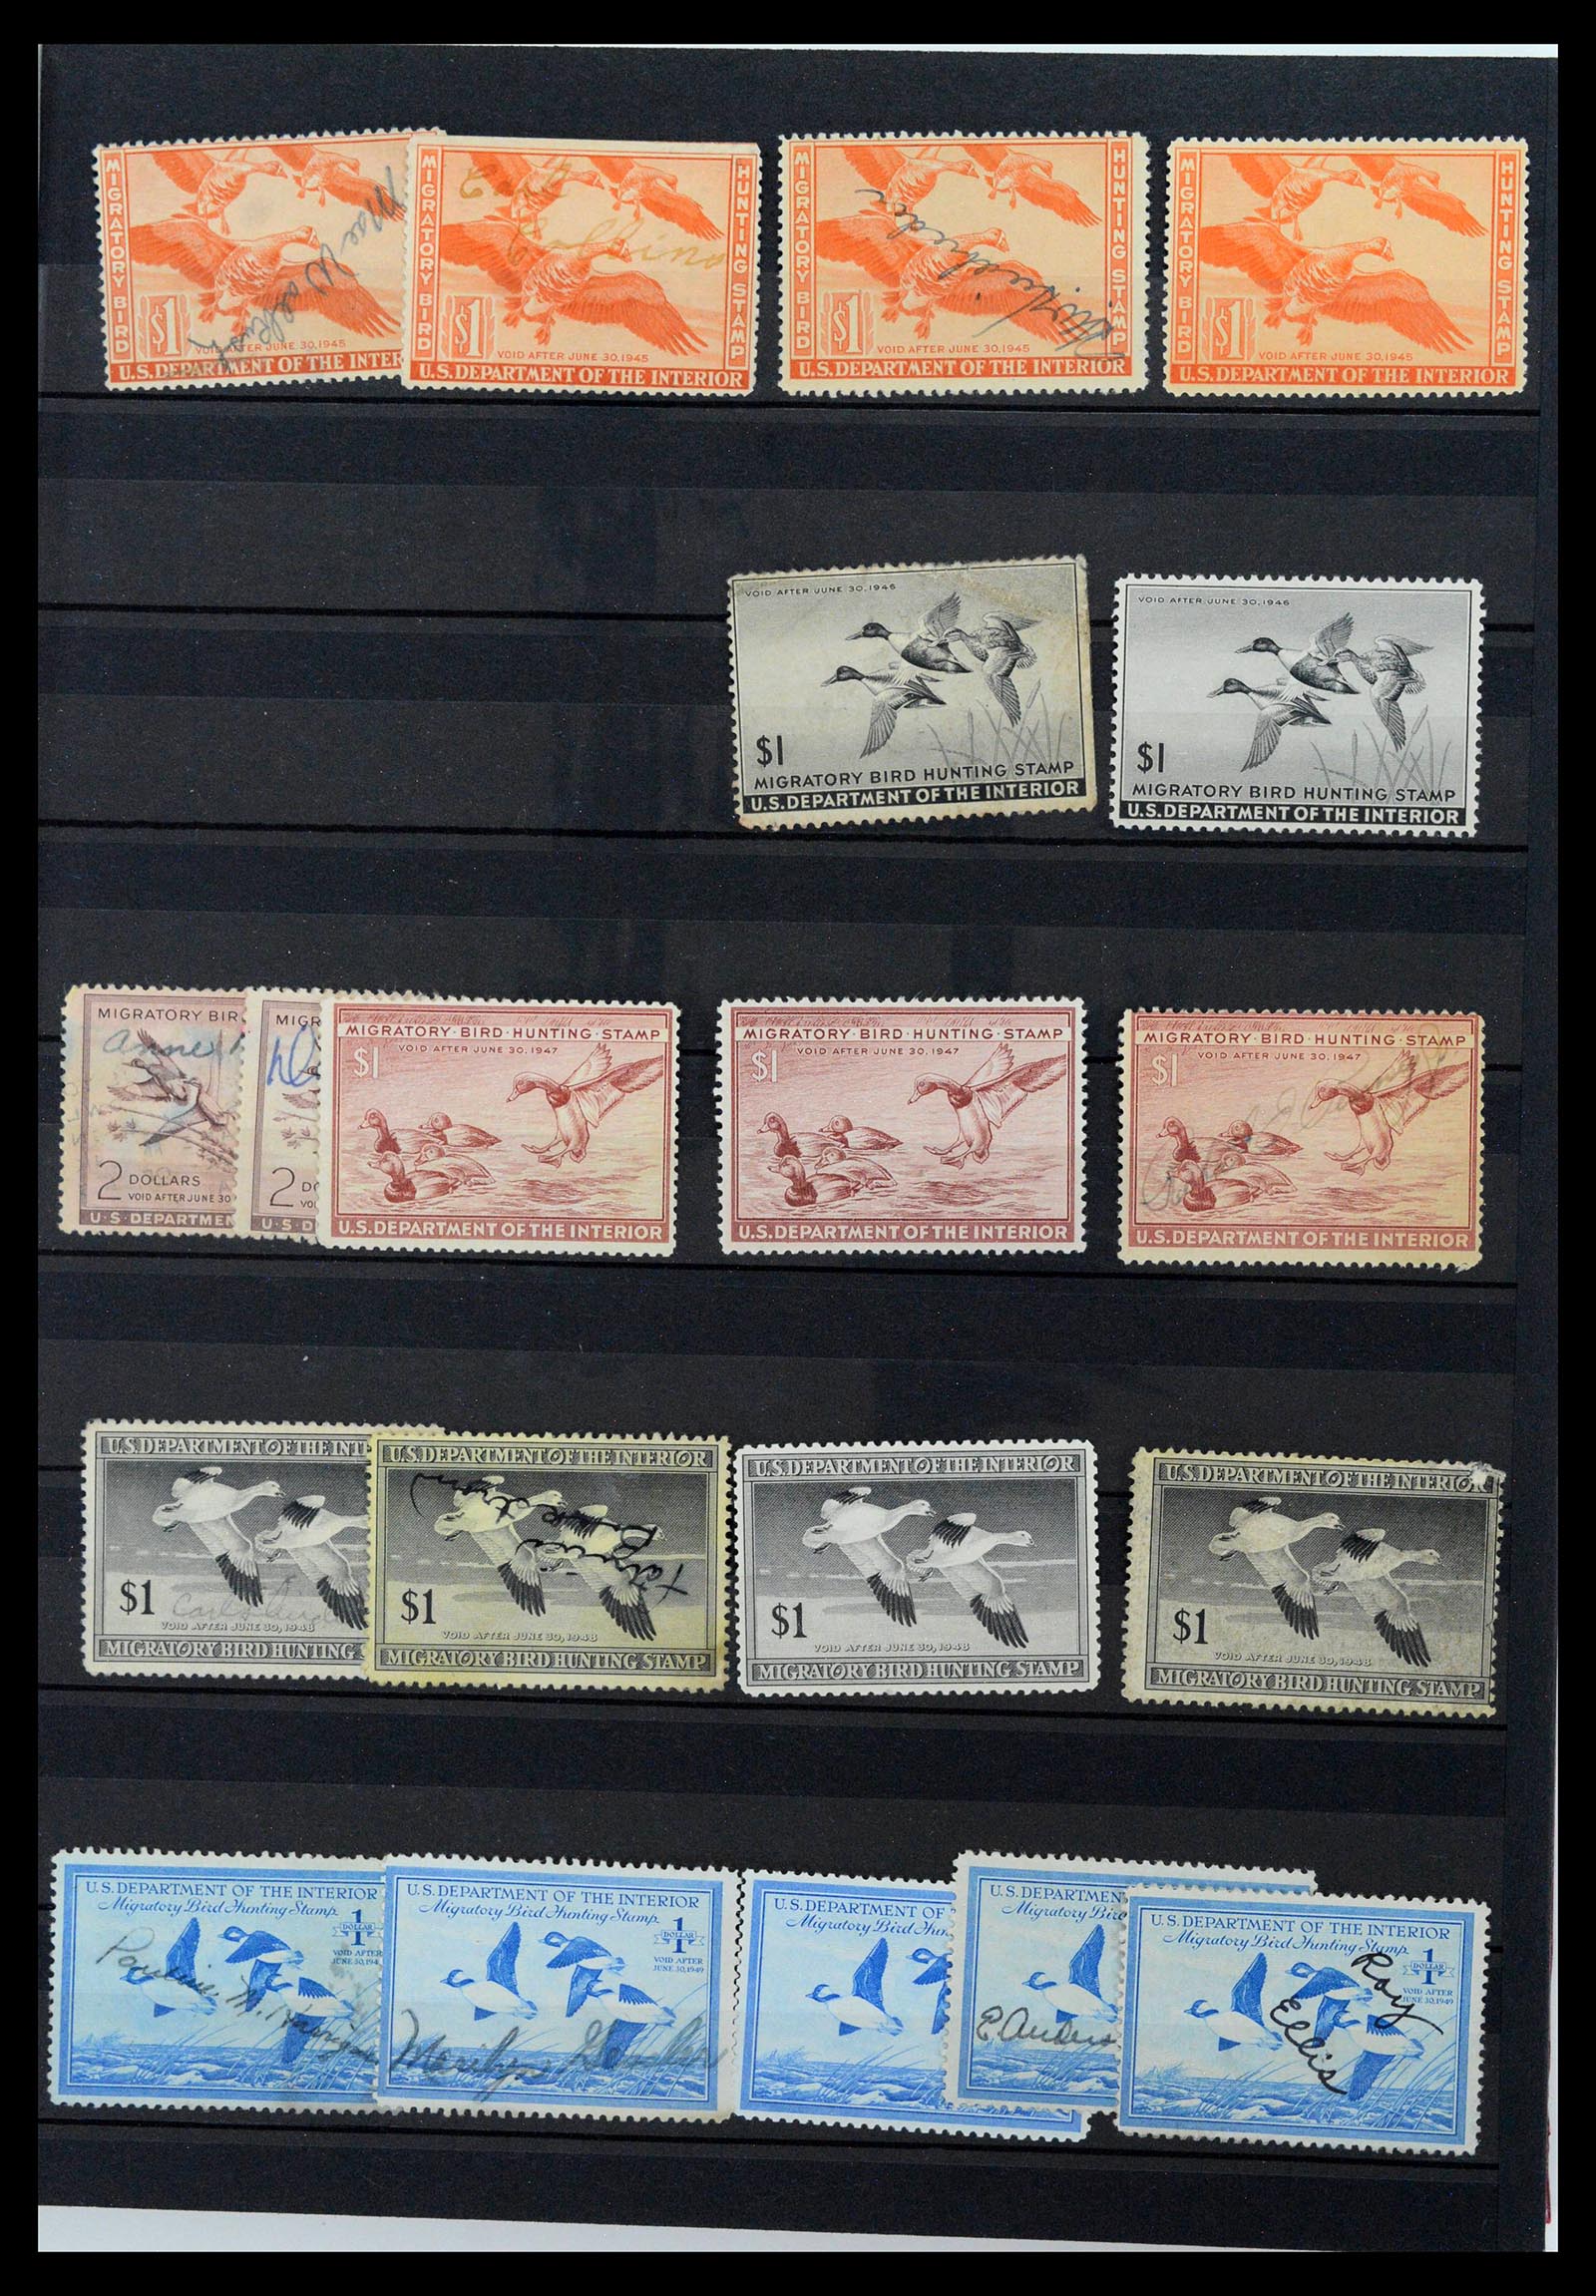 39426 0003 - Stamp collection 39426 USA duckstamps 1934-2007.